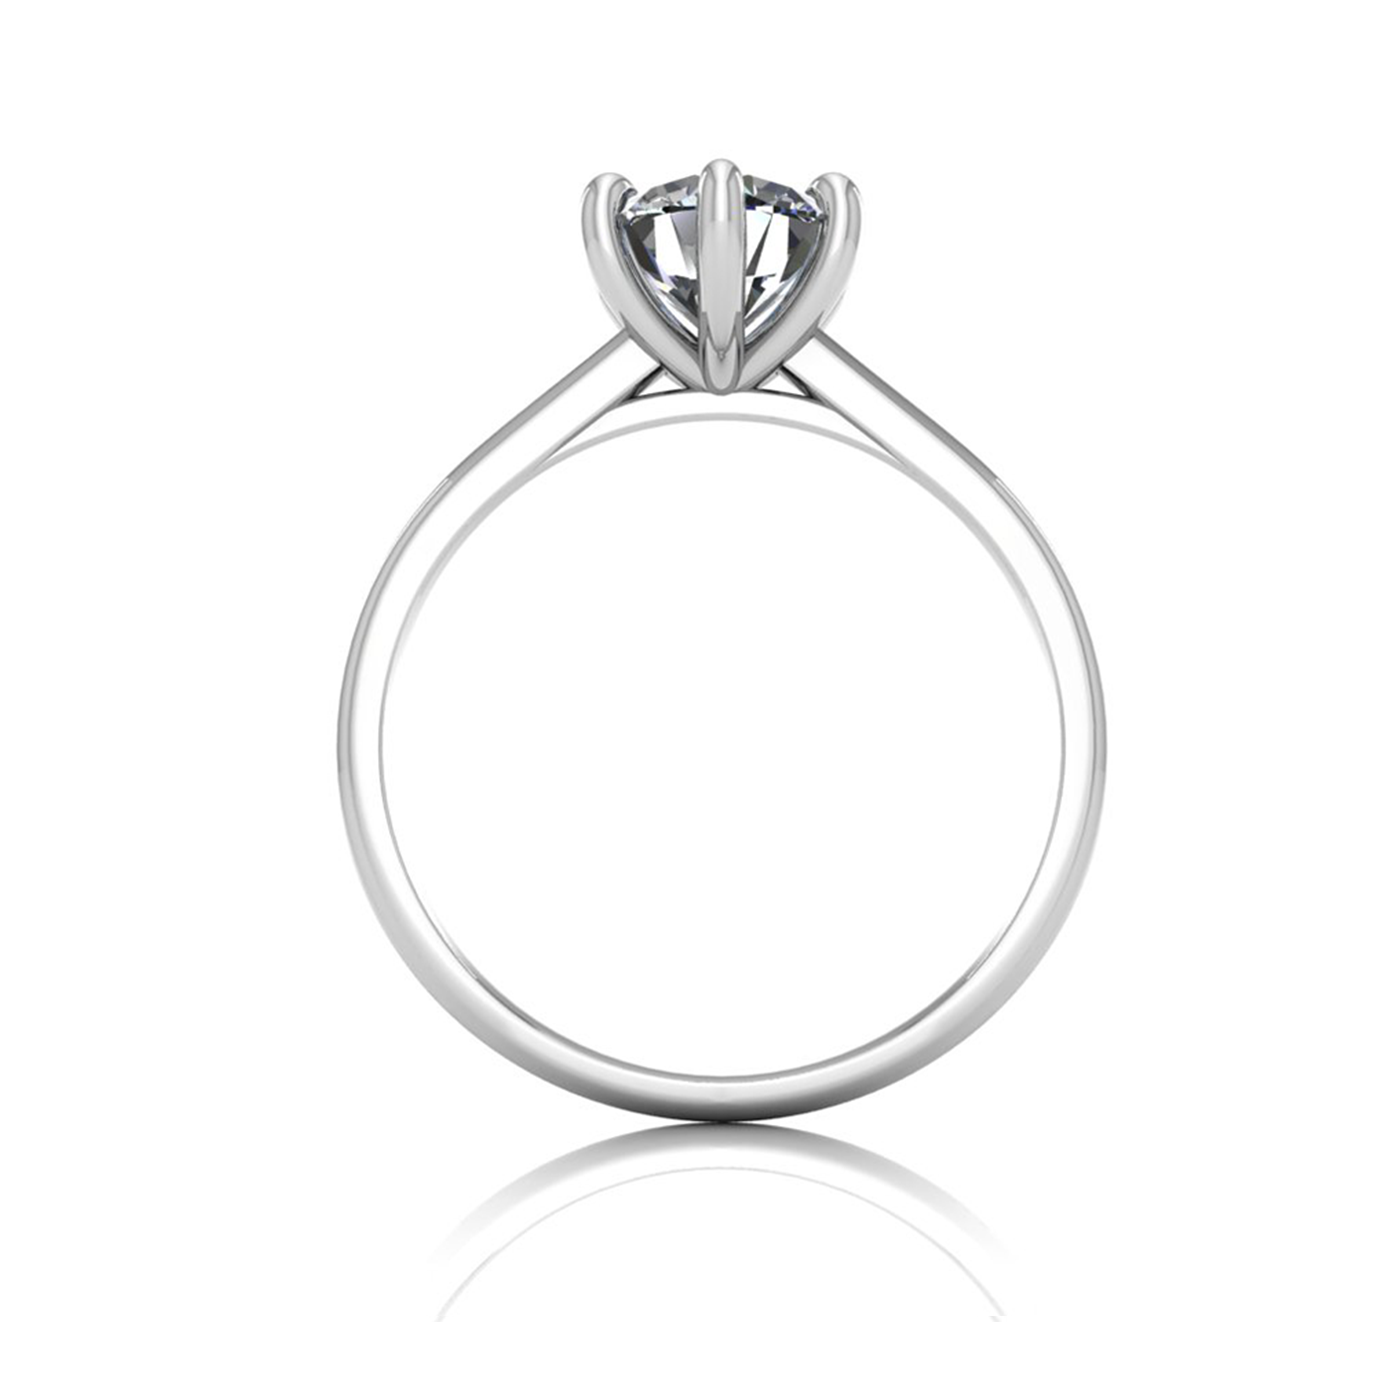 18k white gold 1,00 ct 6 prongs solitaire round cut diamond engagement ring with whisper thin band